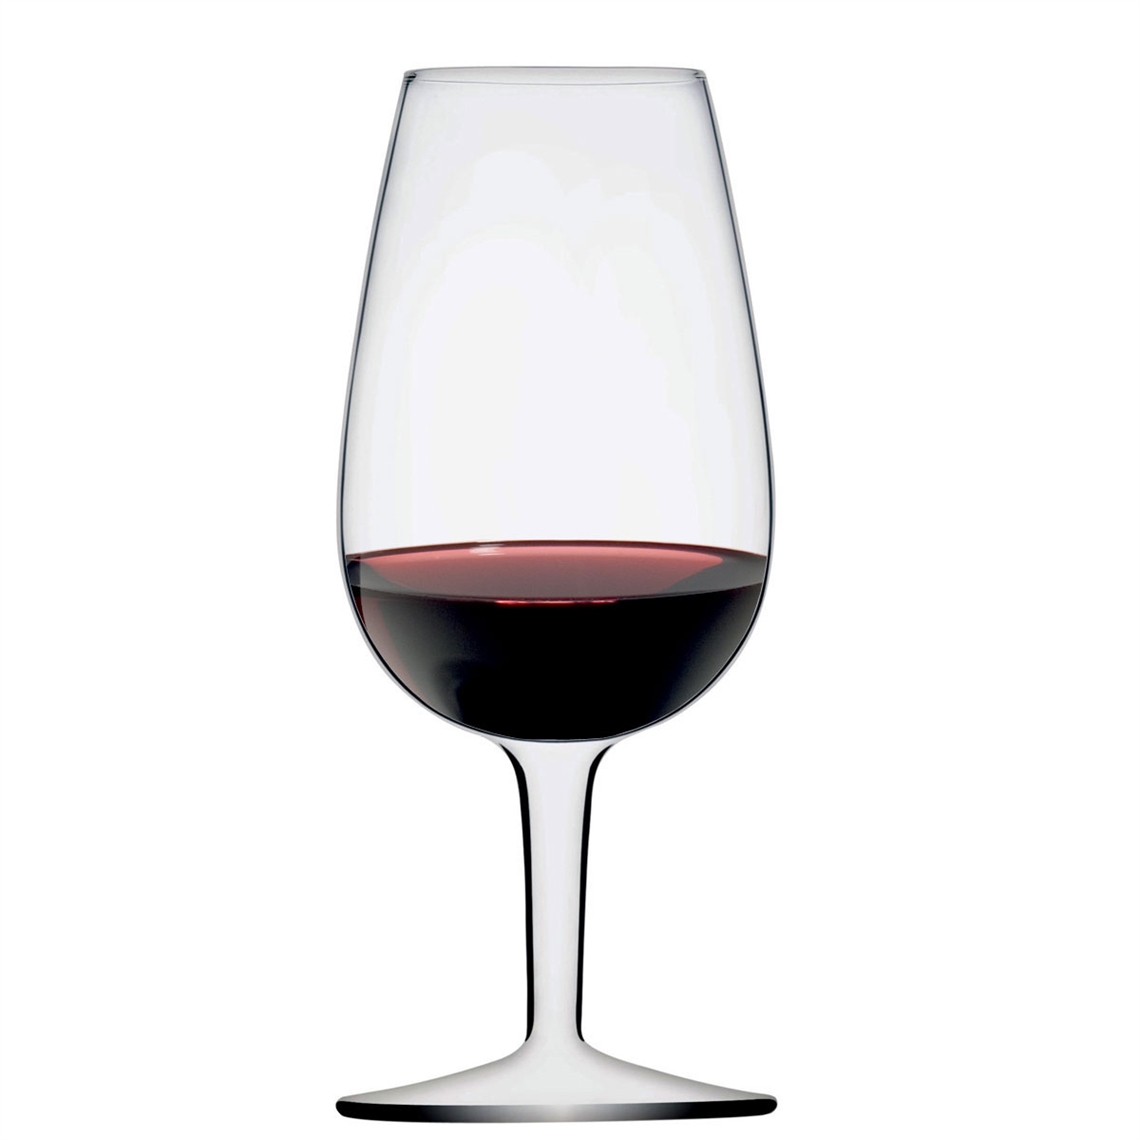 View more zalto from our Wine Tasting Glasses range